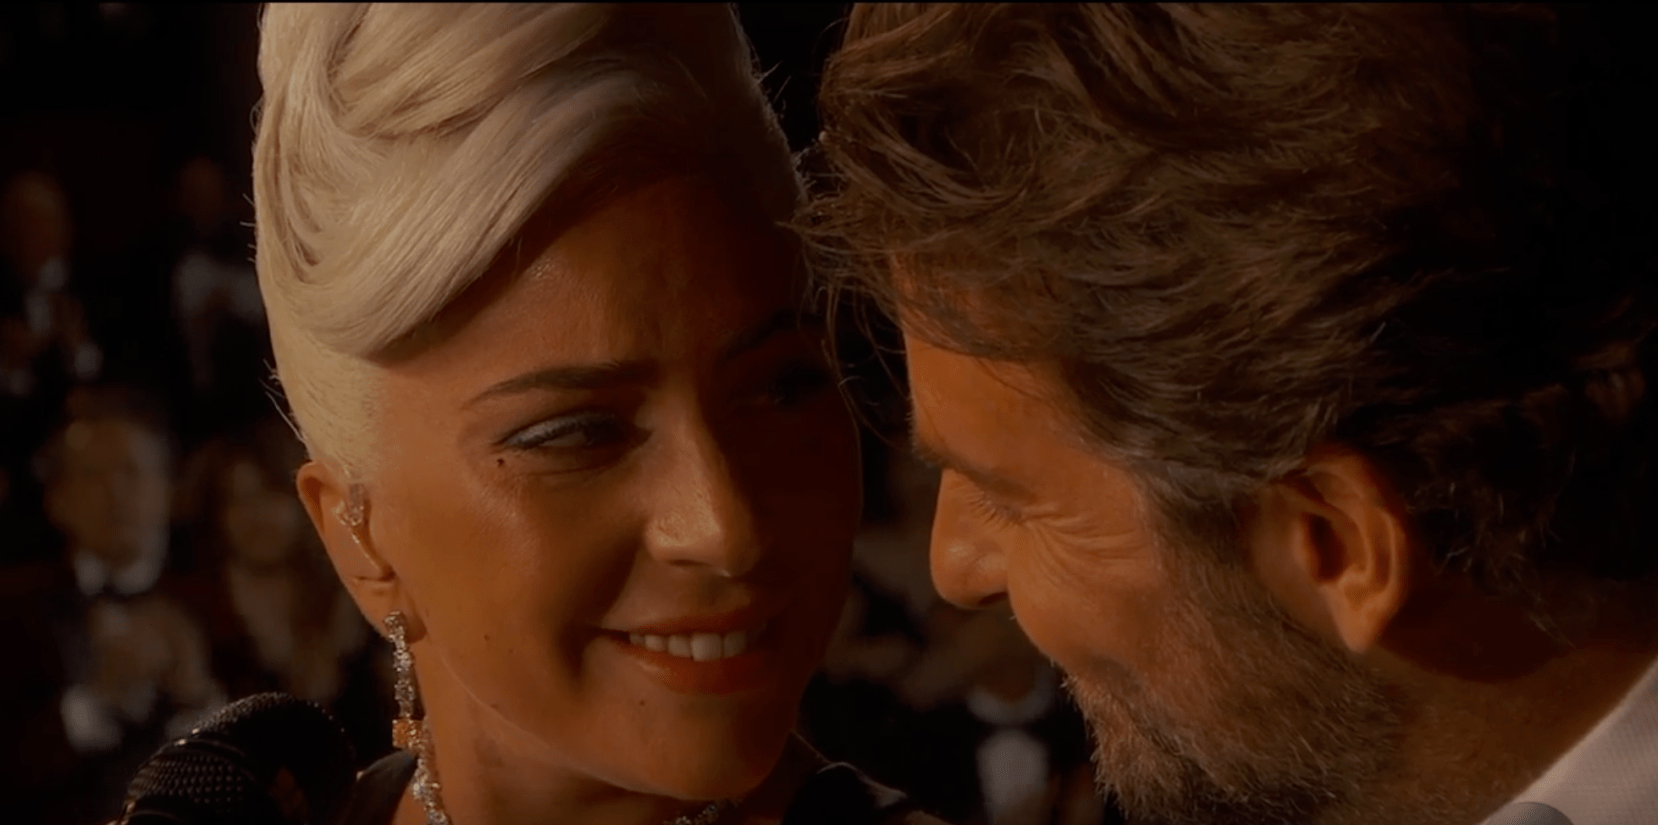 Bradley Cooper And Lady Gaga S Intimate Moment At The Oscars